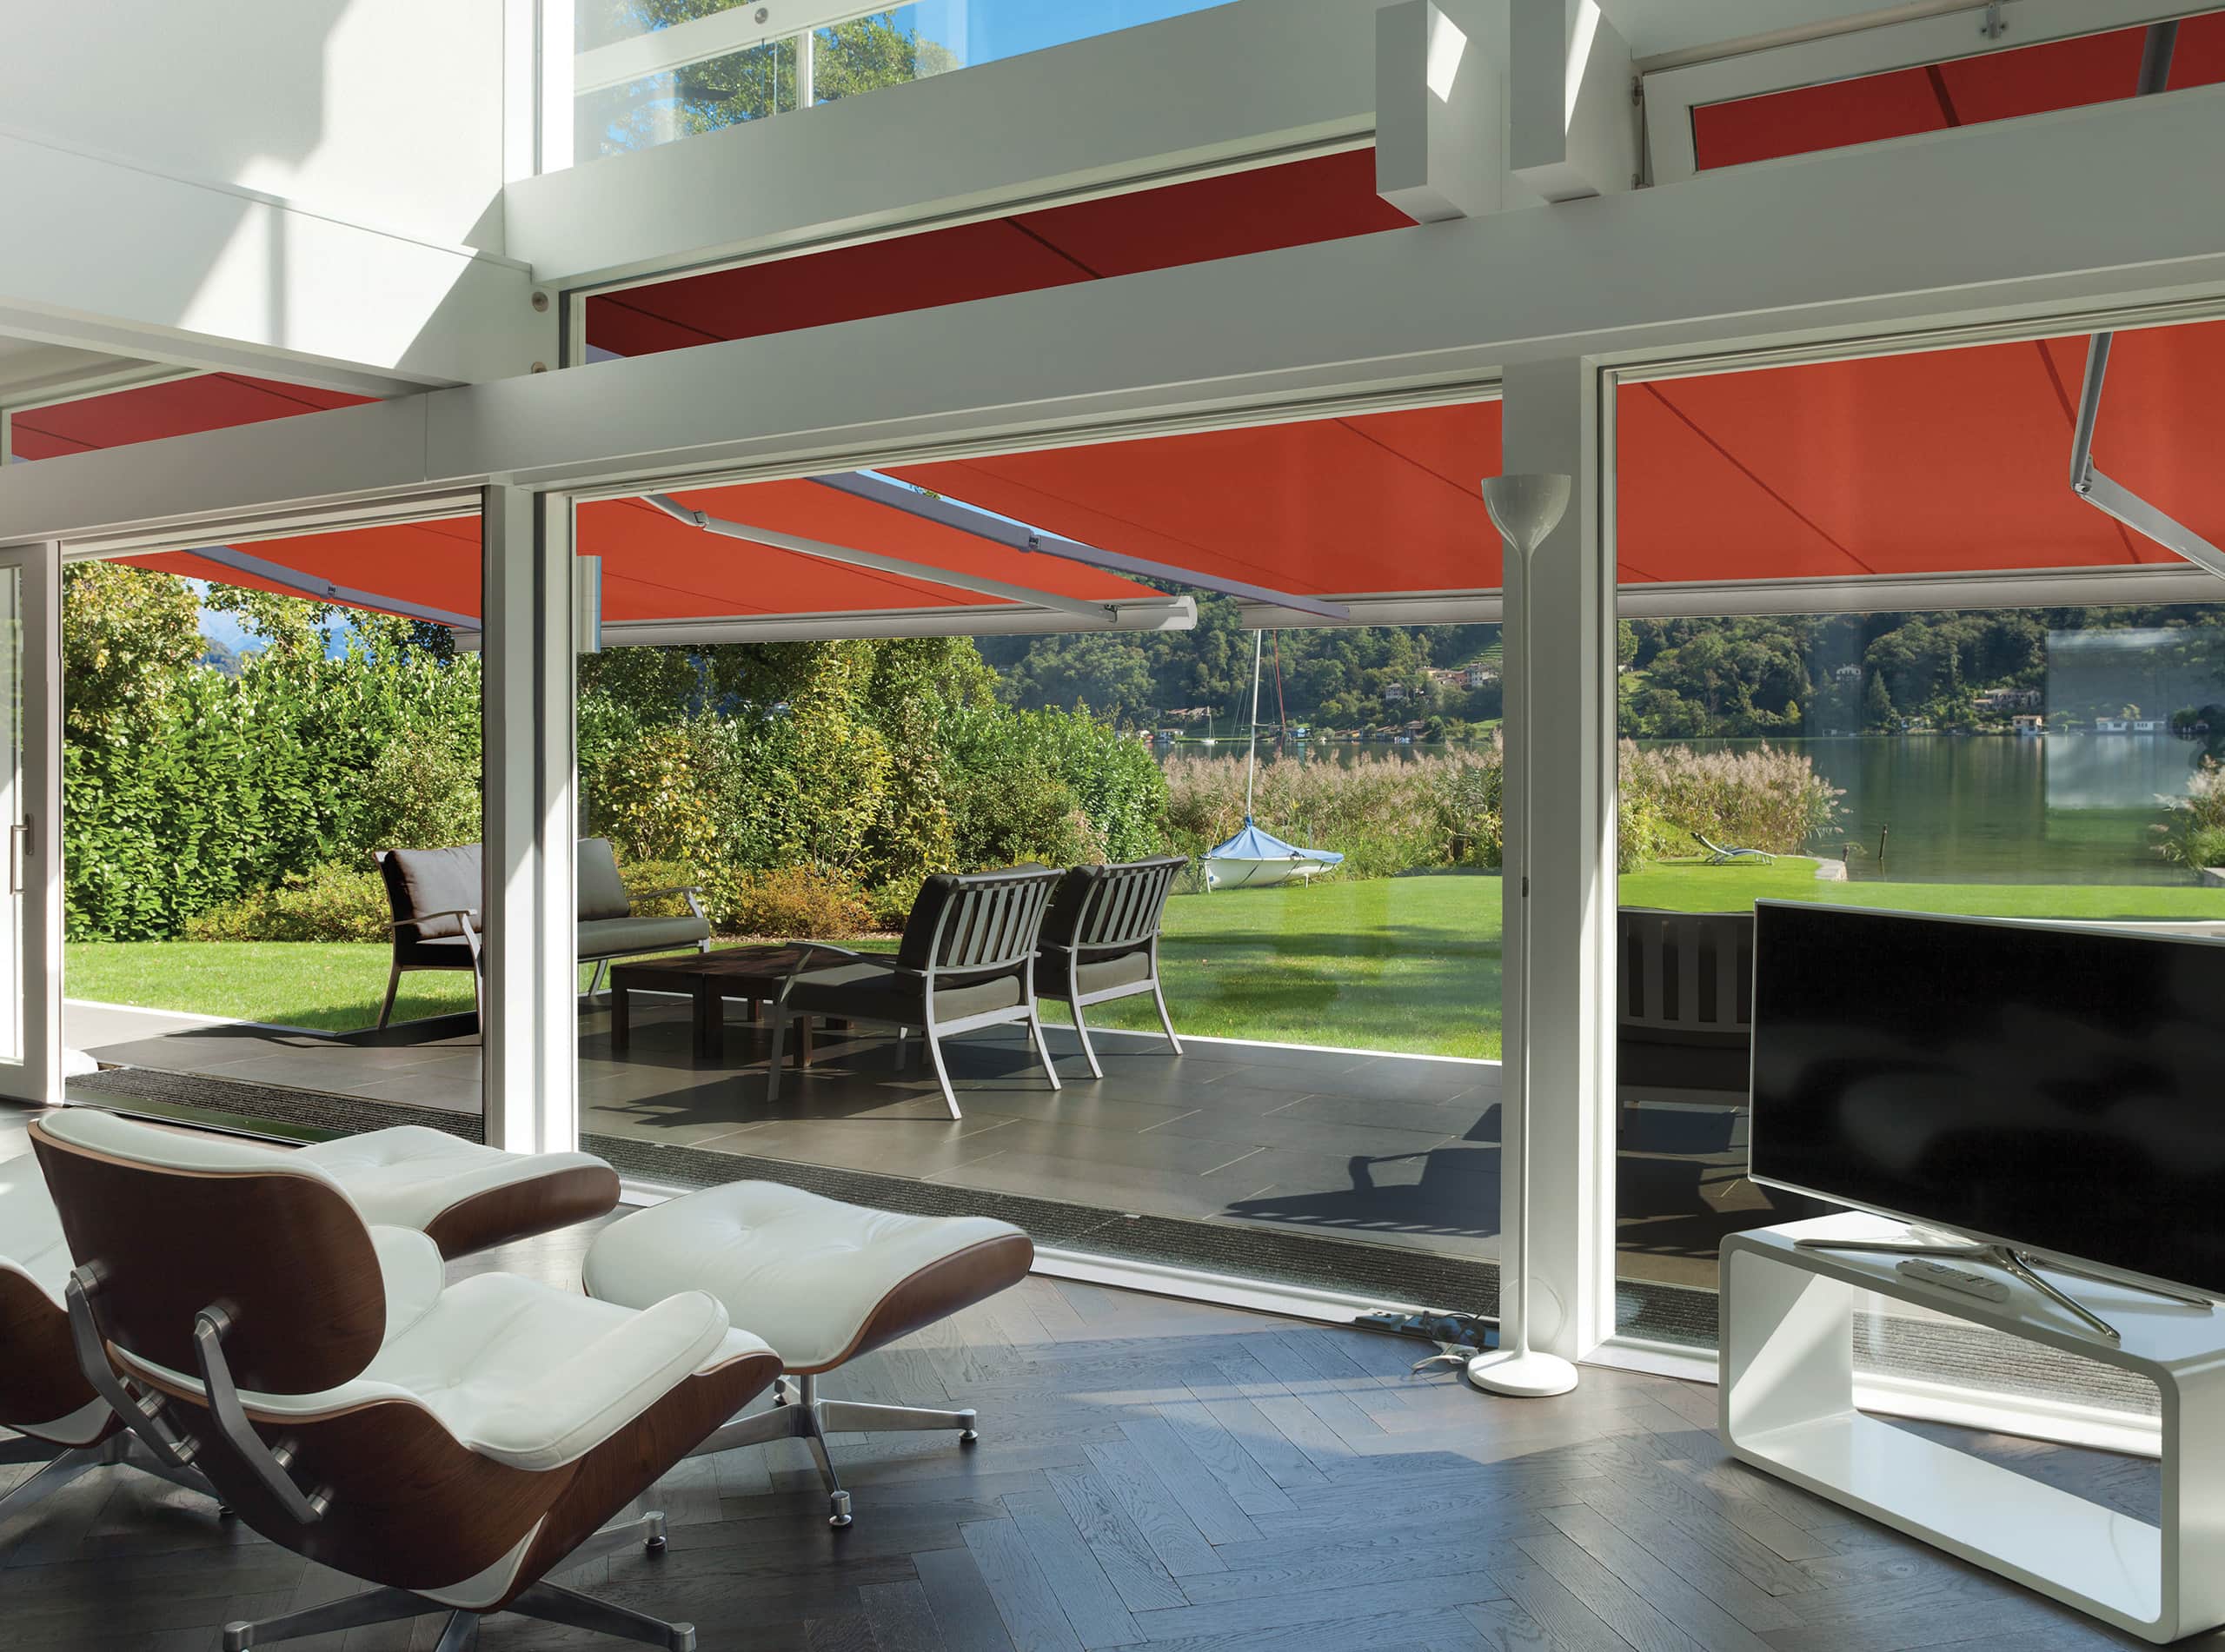 Pro Series Cassette Retractable Awning_Patio View